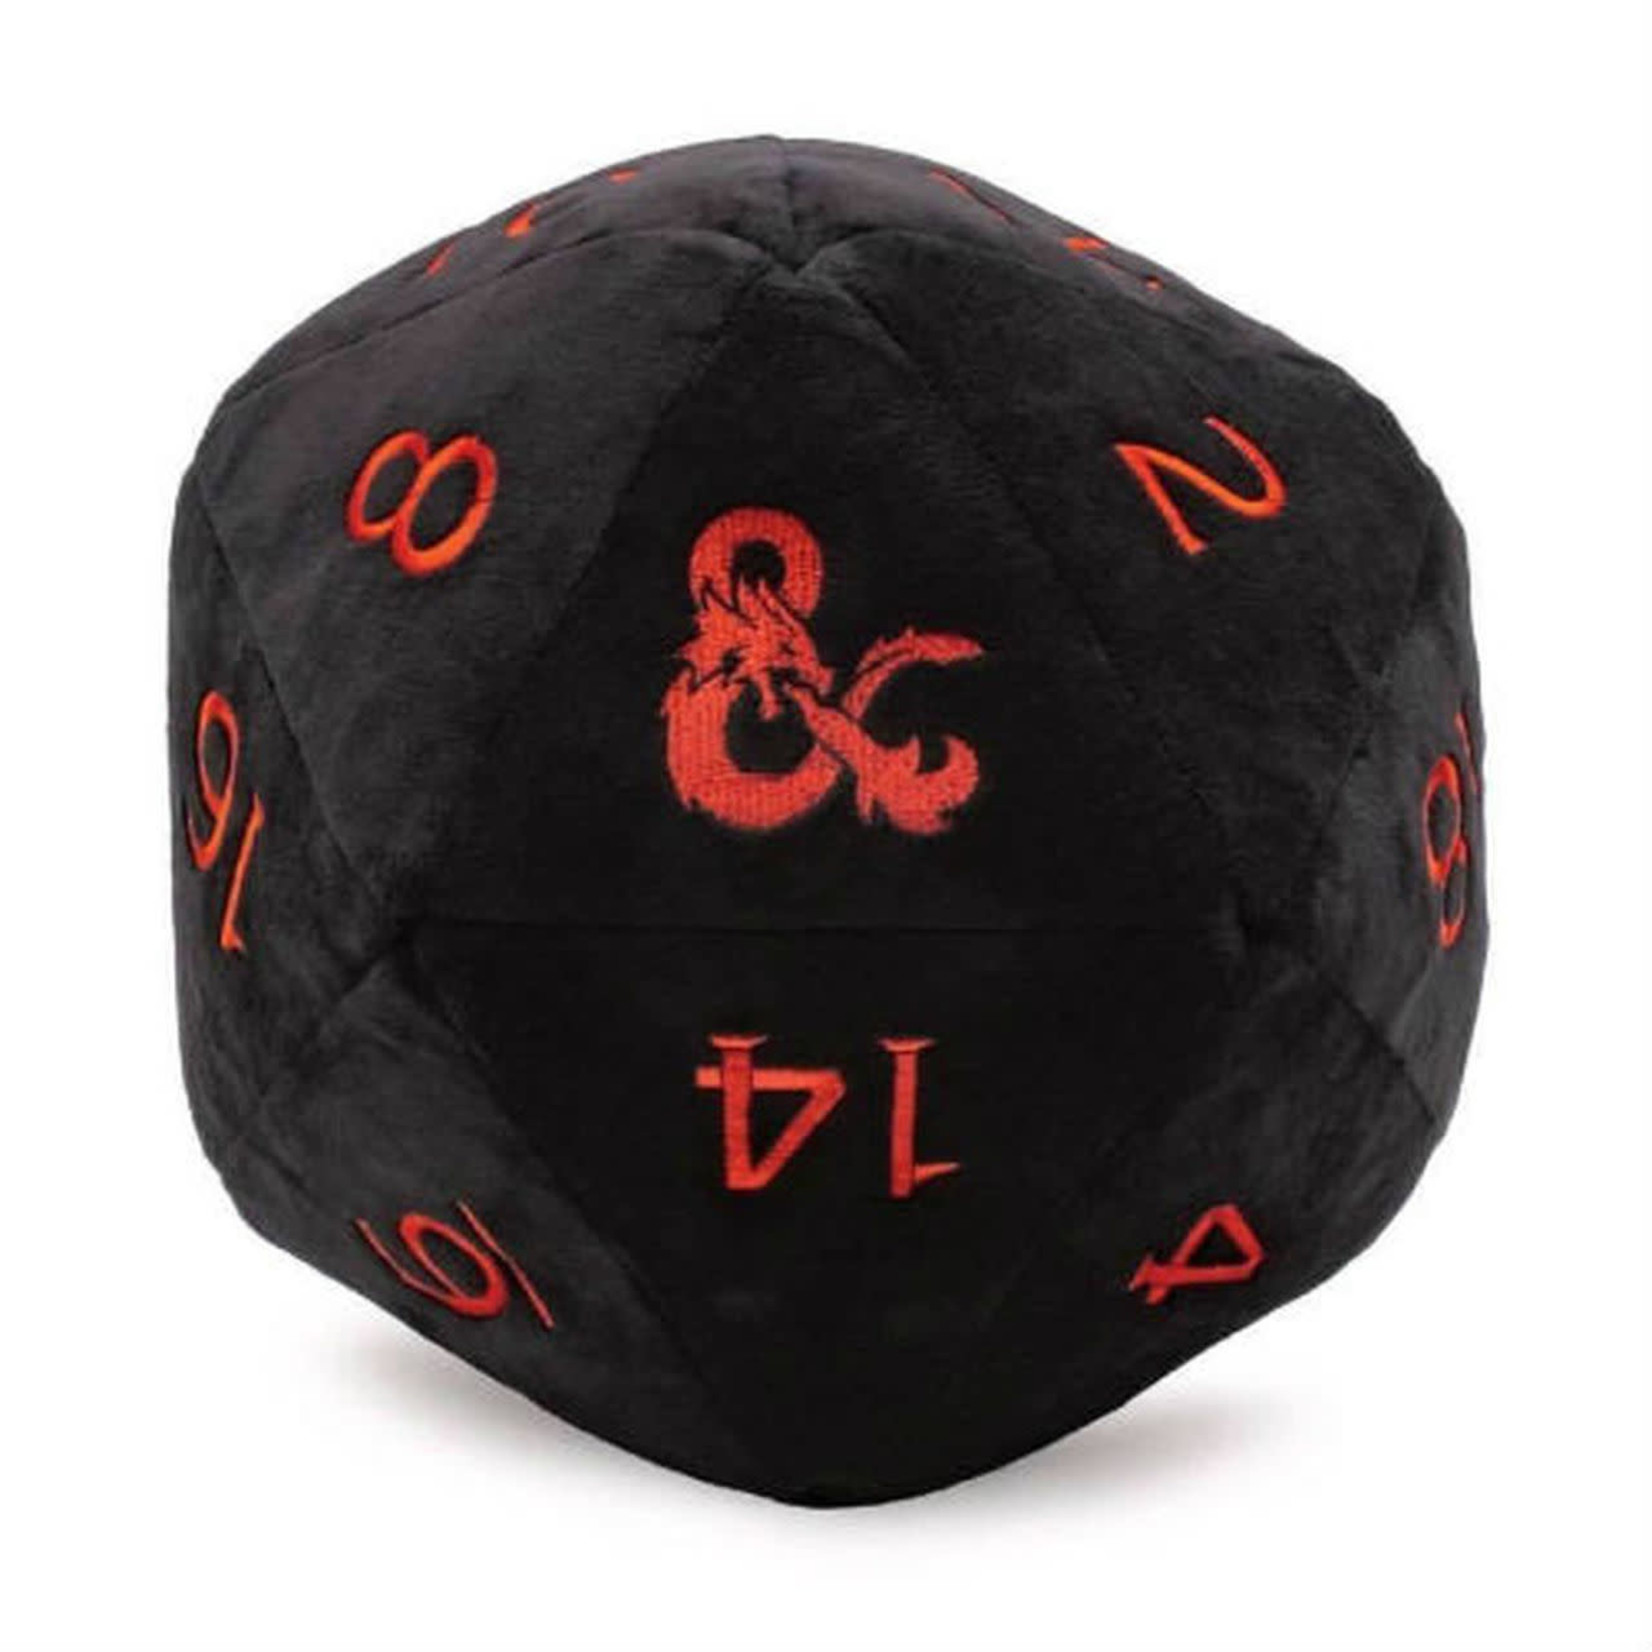 Ultra Pro Jumbo d20 D&D Plush: Black with Red Numbering